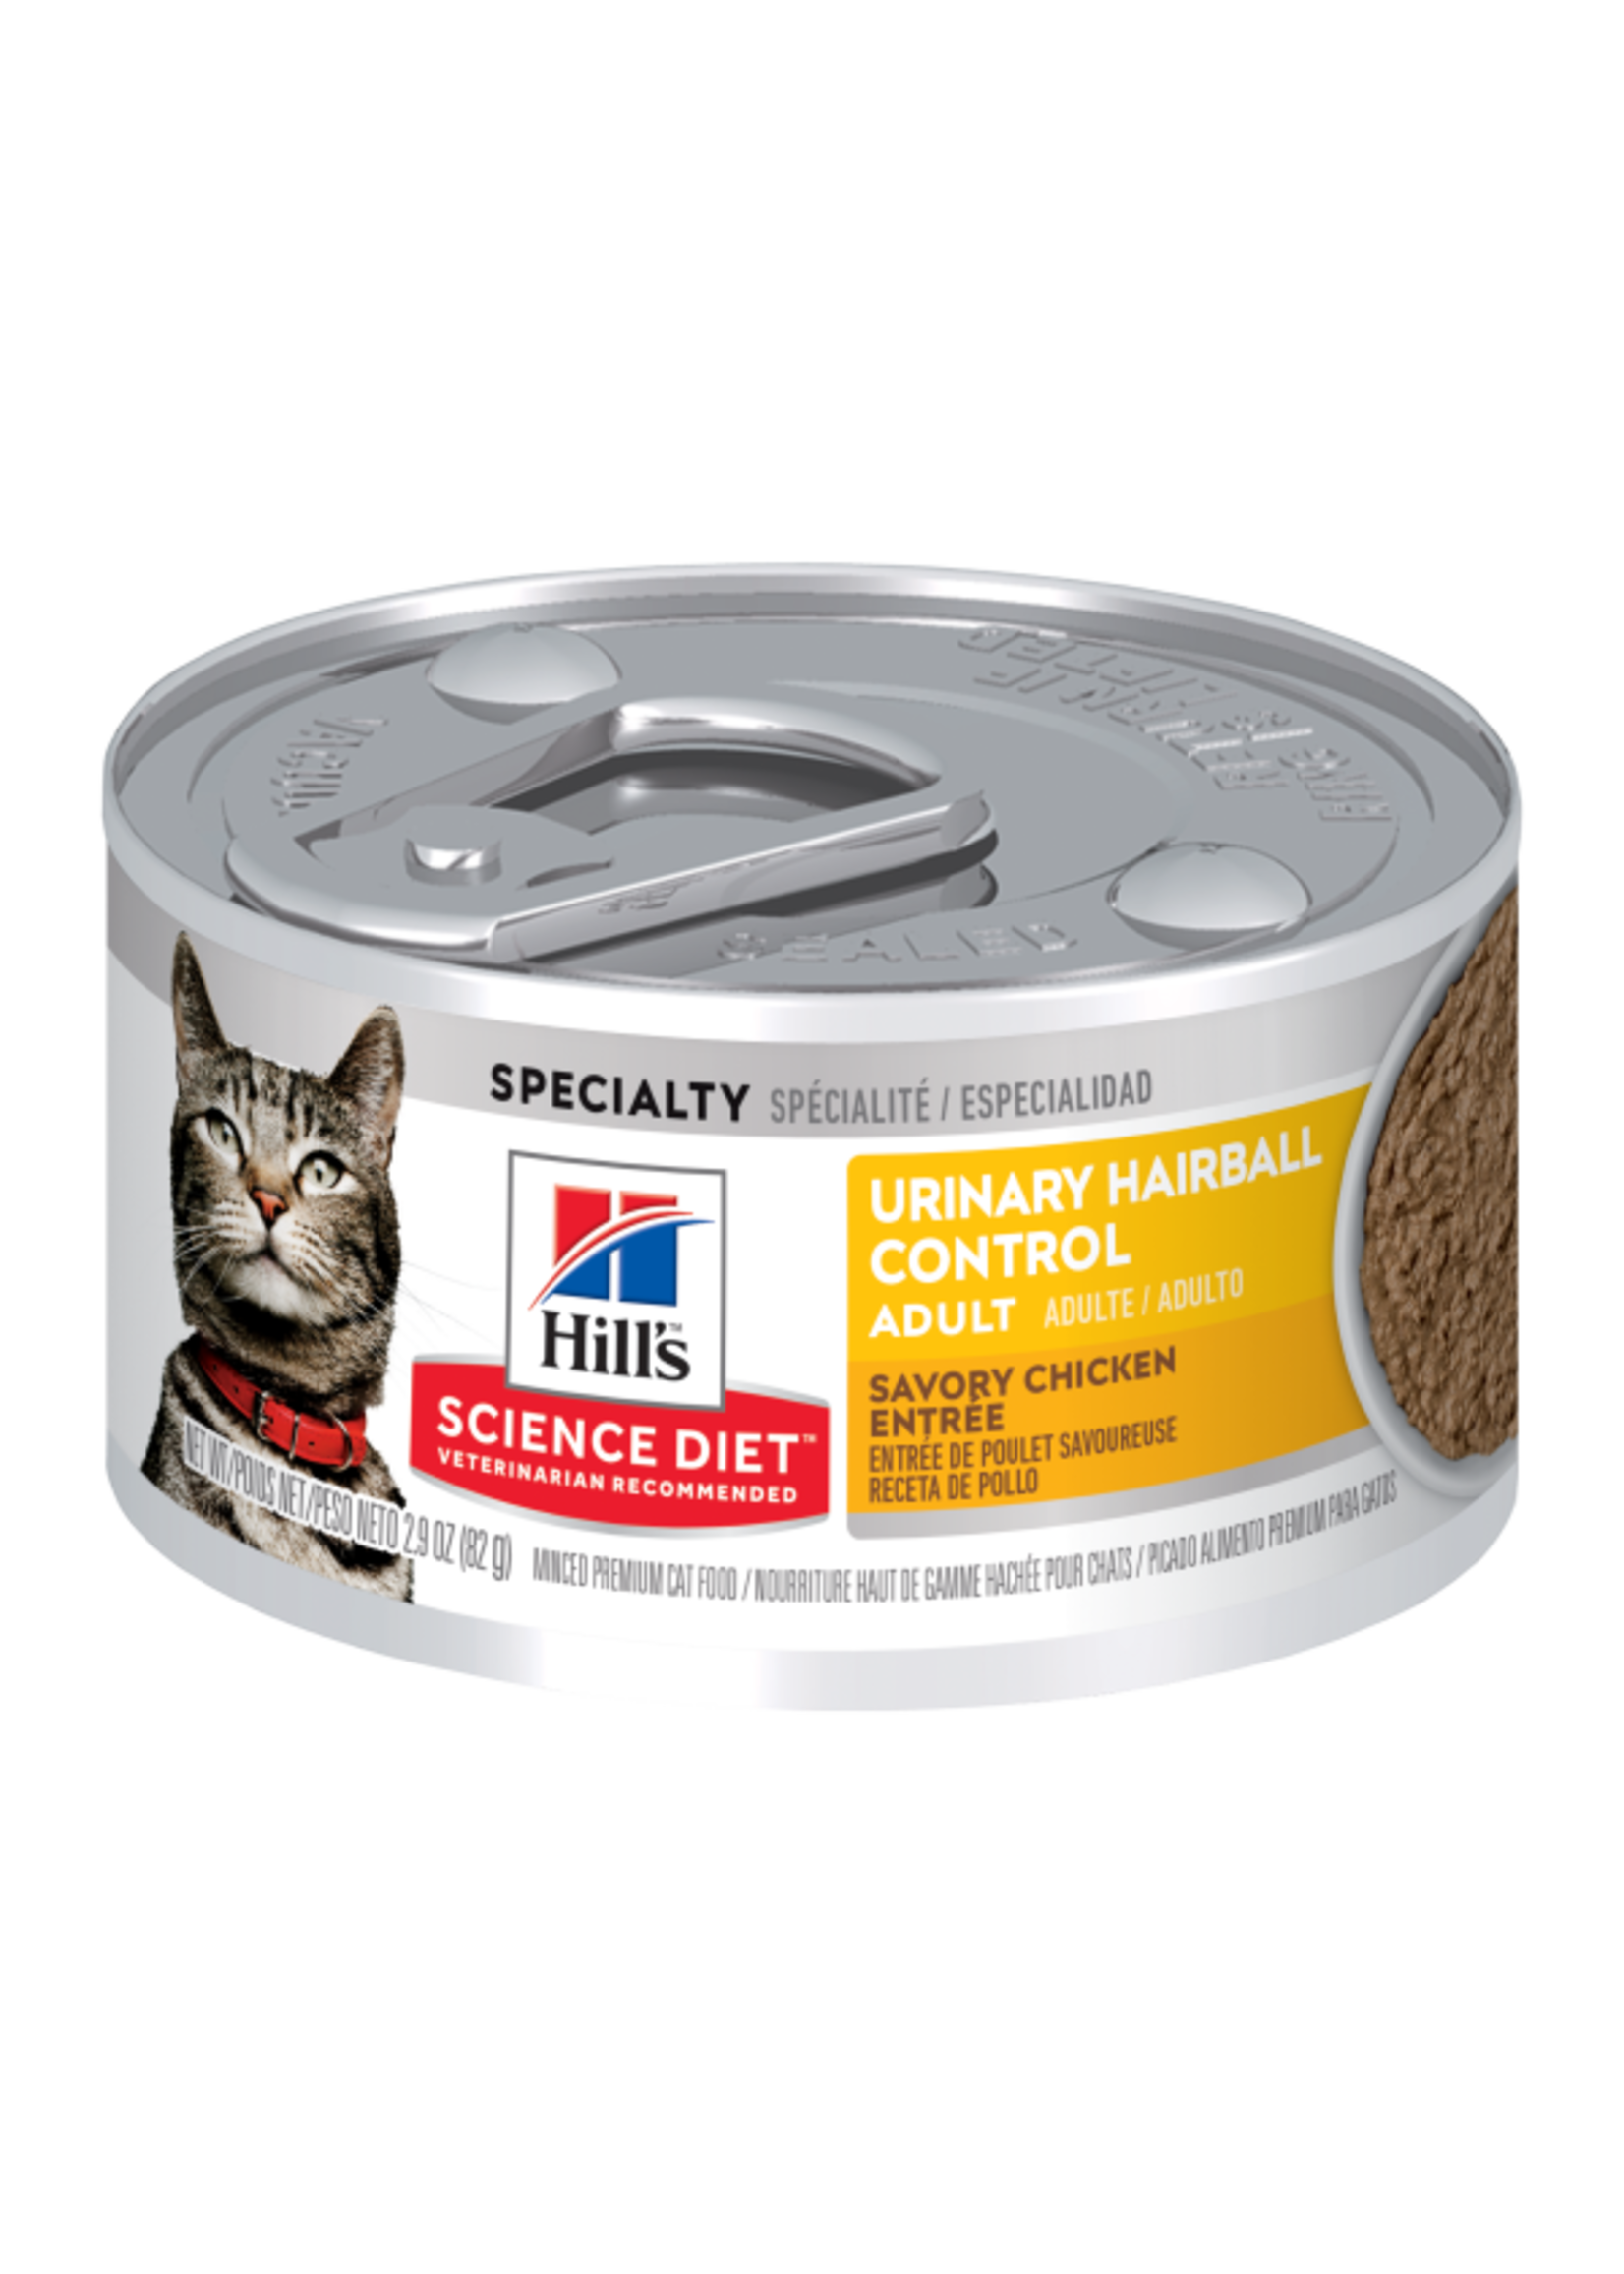 Hill's Science Diet Hill's Science Diet - Cat Adult Urinary & Hairball Ctrl 2.9oz